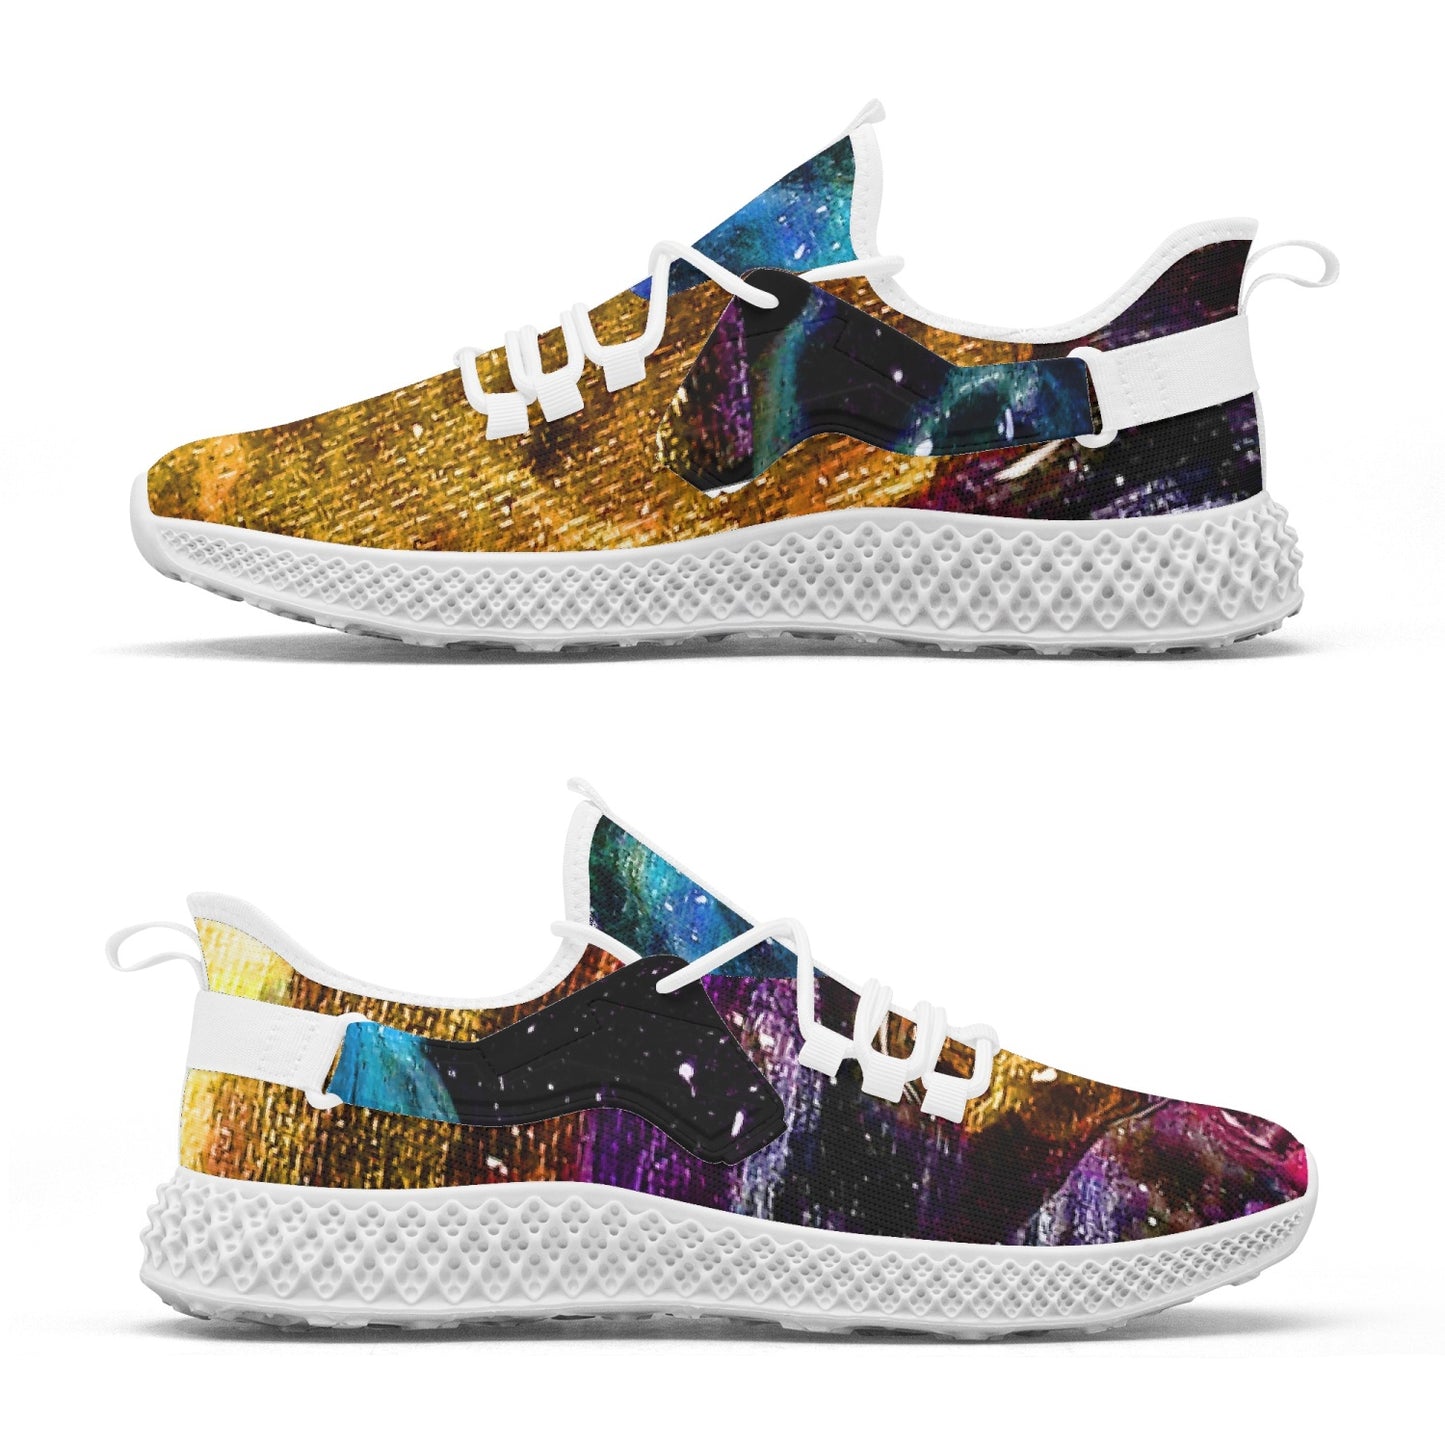 Galactic Clouds Net Style Mesh Knit Sneakers